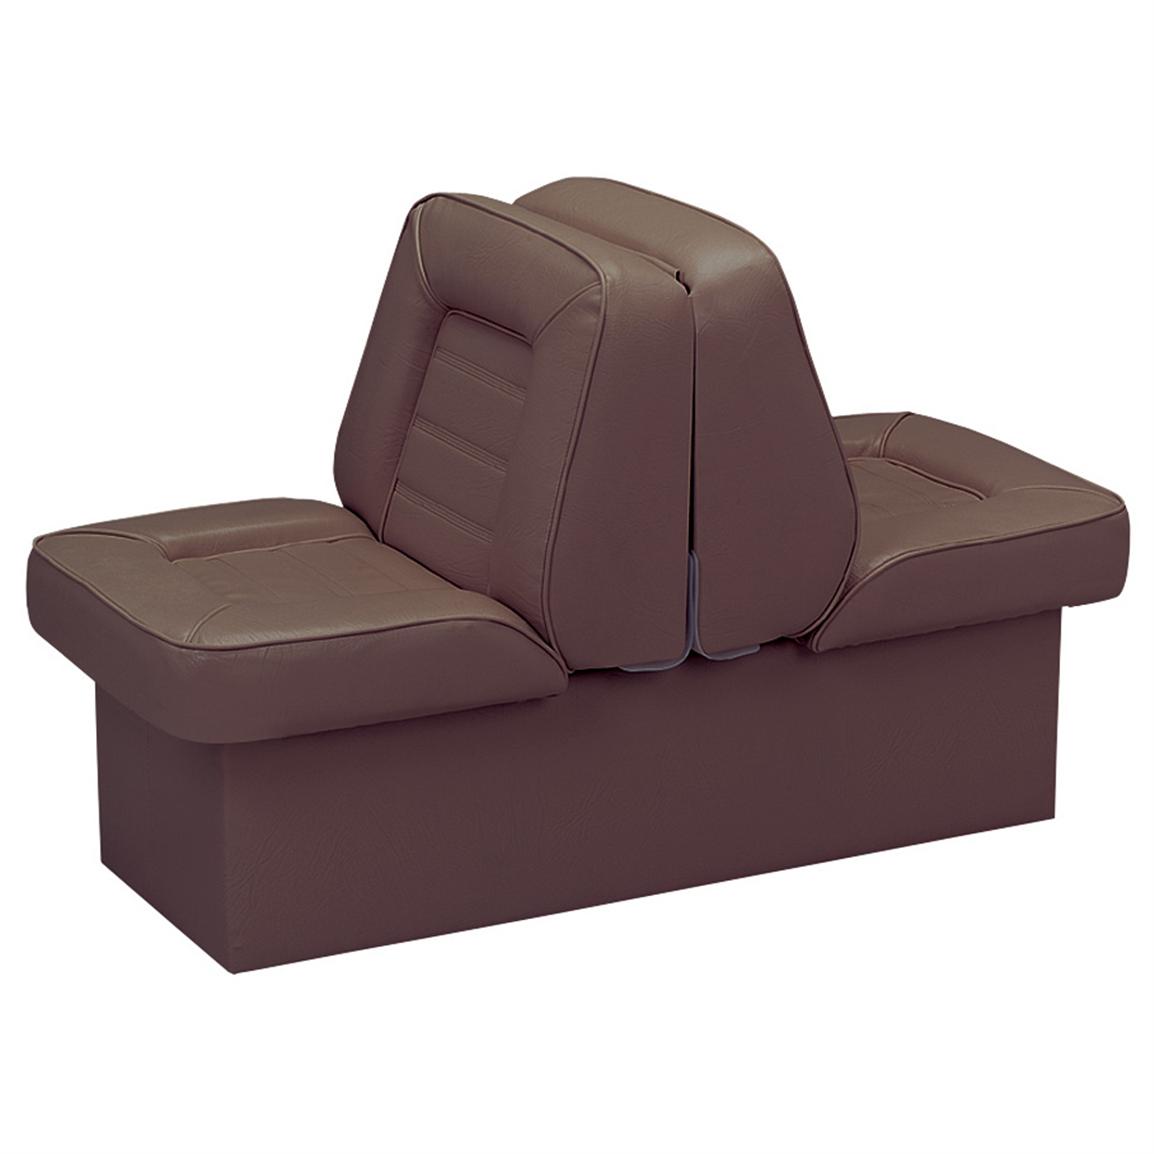 Wise® Deluxe Boat Lounge Seat with 10" Base - 610376 ...